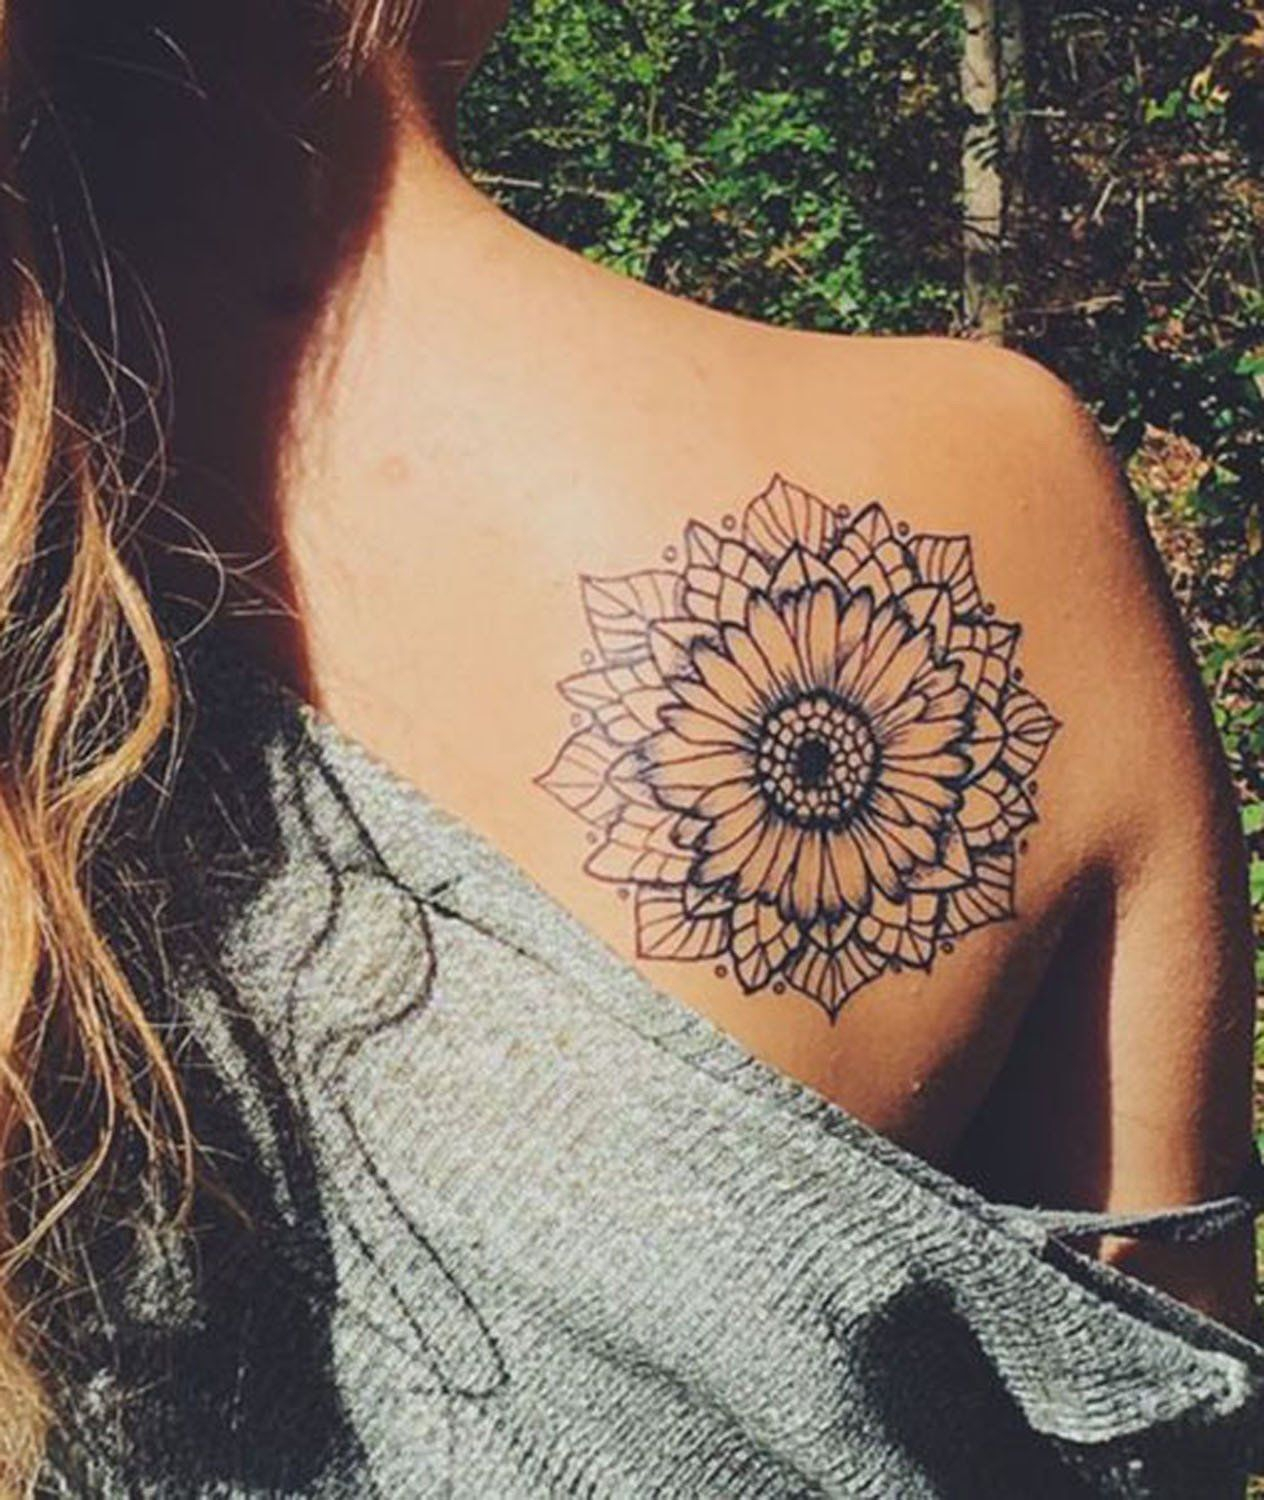 Mandala Sunflower Black And White Back Shoulder Tattoo Ideas At in dimensions 1264 X 1500